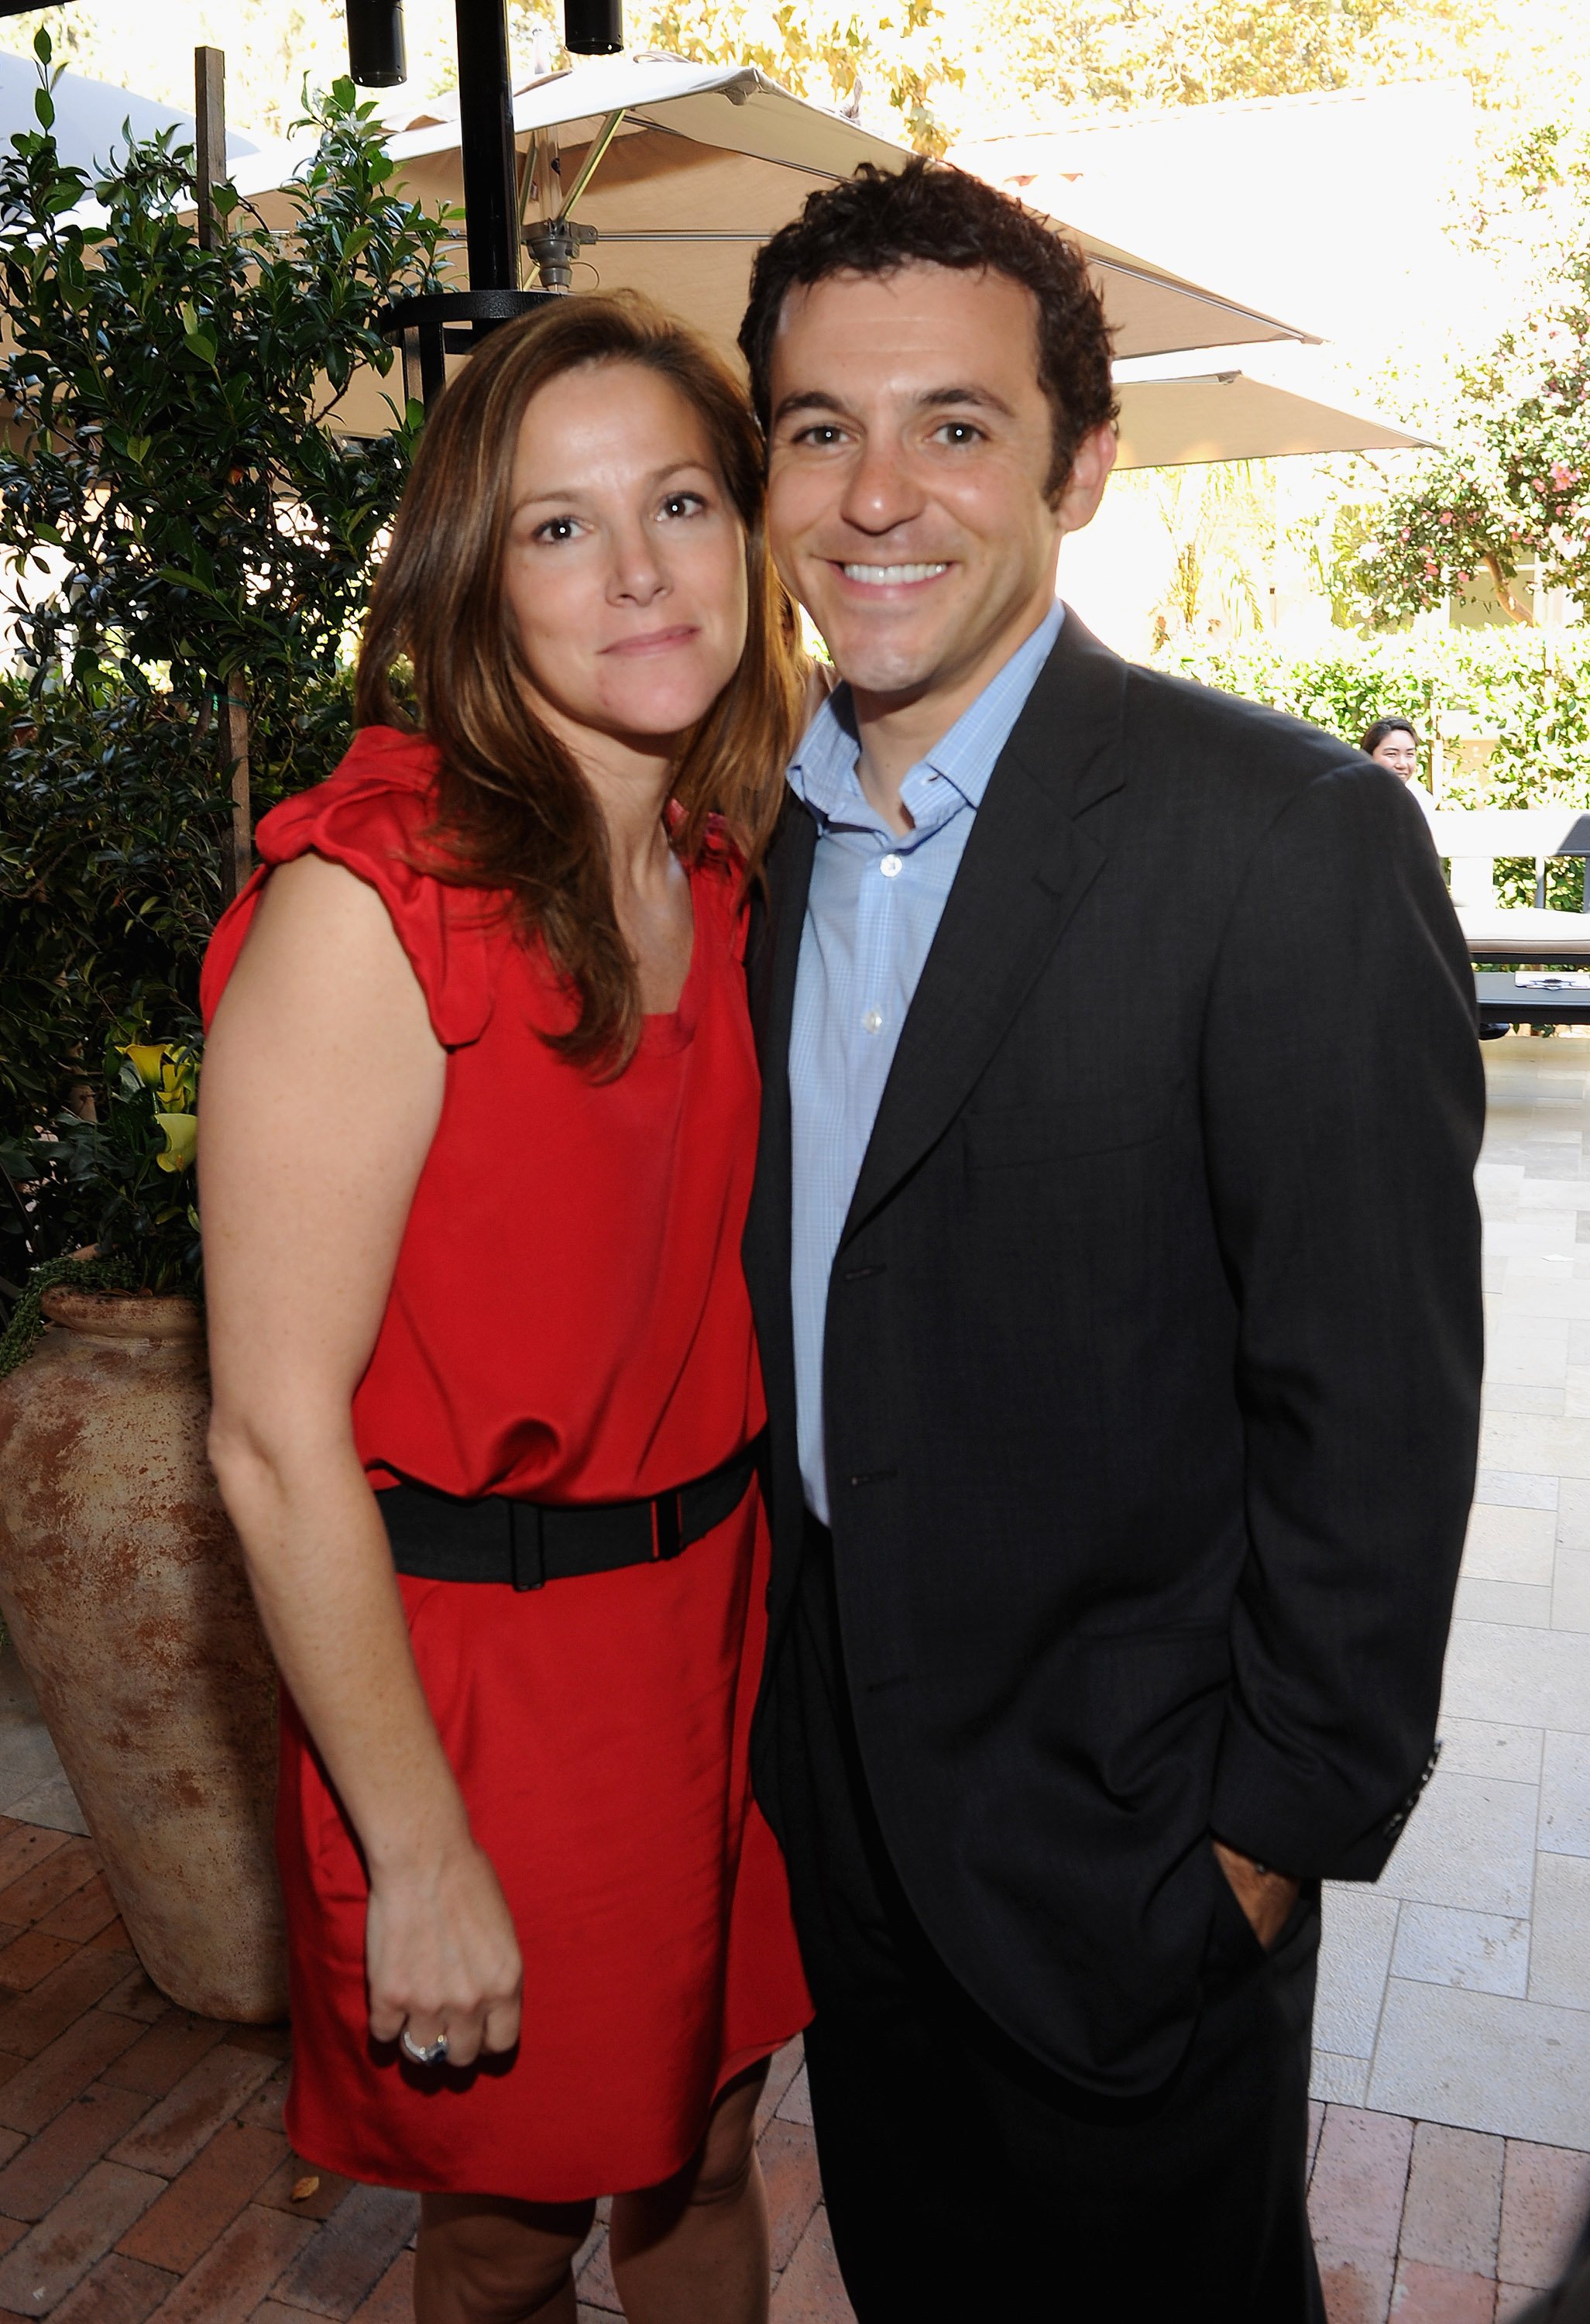  Fred Savage (R) and Jennifer Lynn Stone attend The First Annual Los Angeles Food & Wine Hosts Wolfgang Puck's Sunday Brunch & Charity Auction at Wolfgang Puck at Hotel Bel-Air on October 16, 2011 | Photo: Getty Images